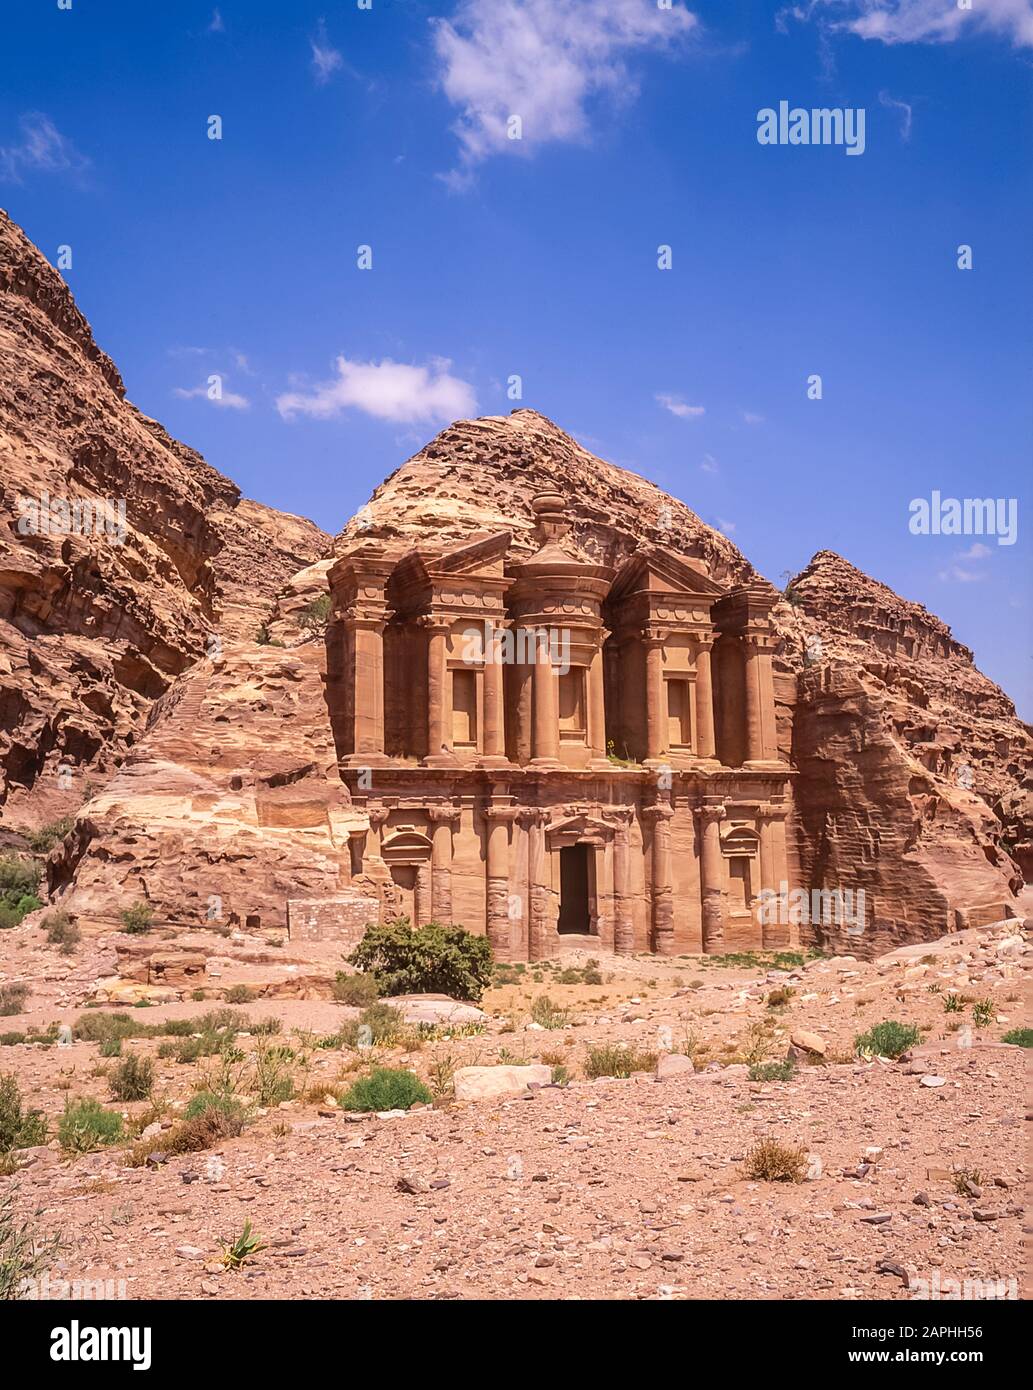 Jordan. The Monastery Building at the World famous UNESCO World Heritage  Site of the Nabatean and Roman ruins and relics at the desert town of Petra  much used as a motion picture